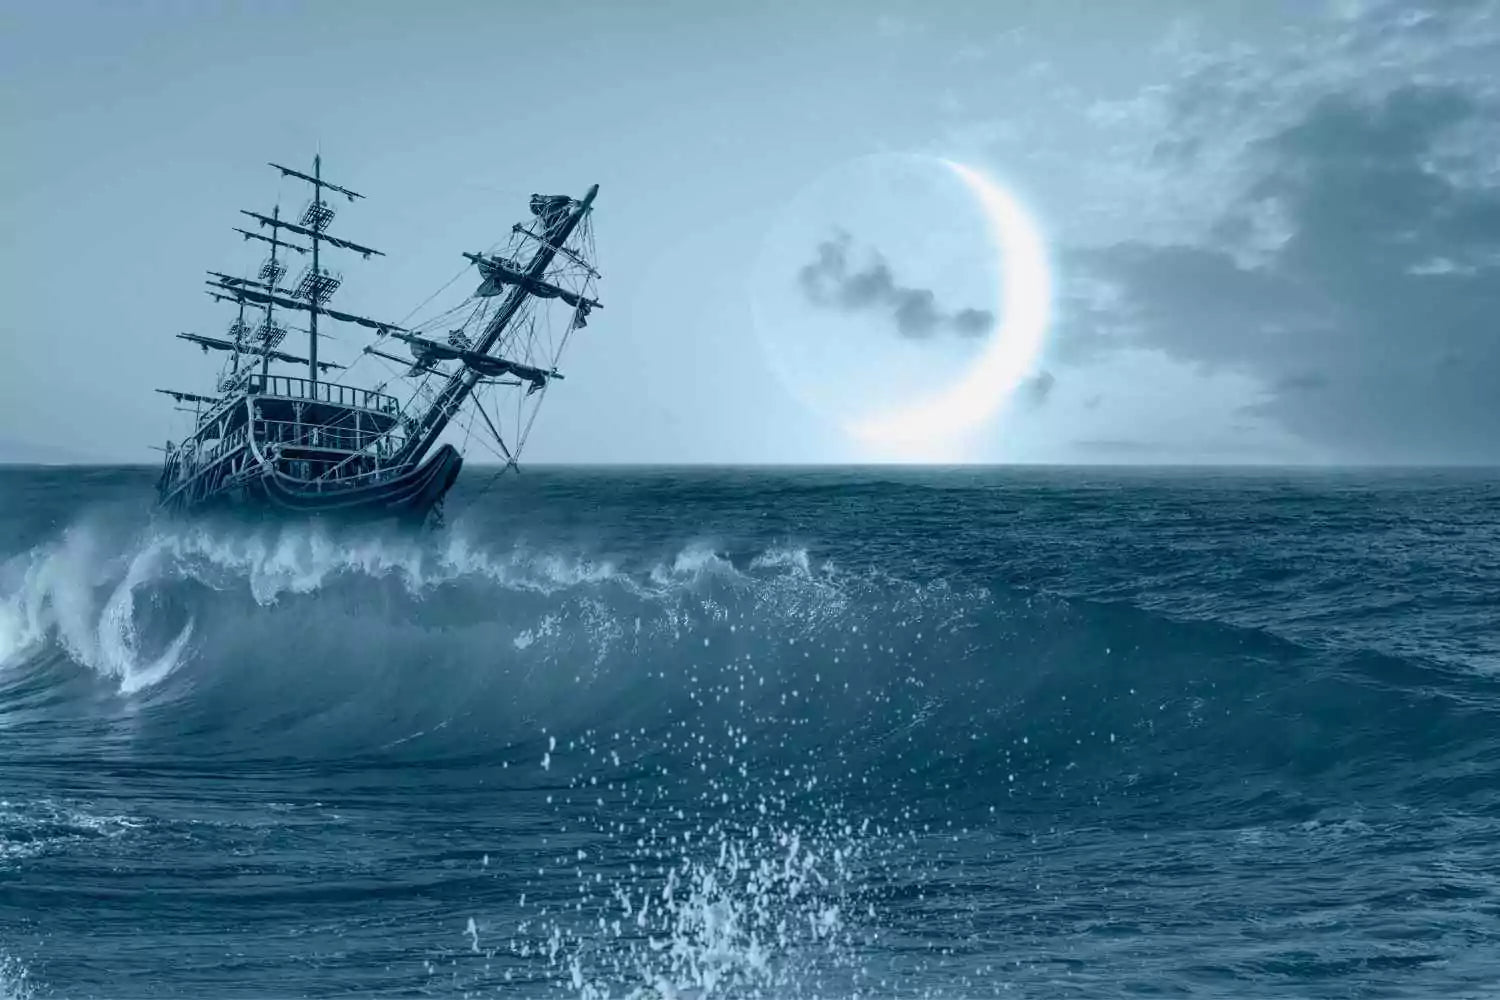 A ship sails on the waves with a moon behind it